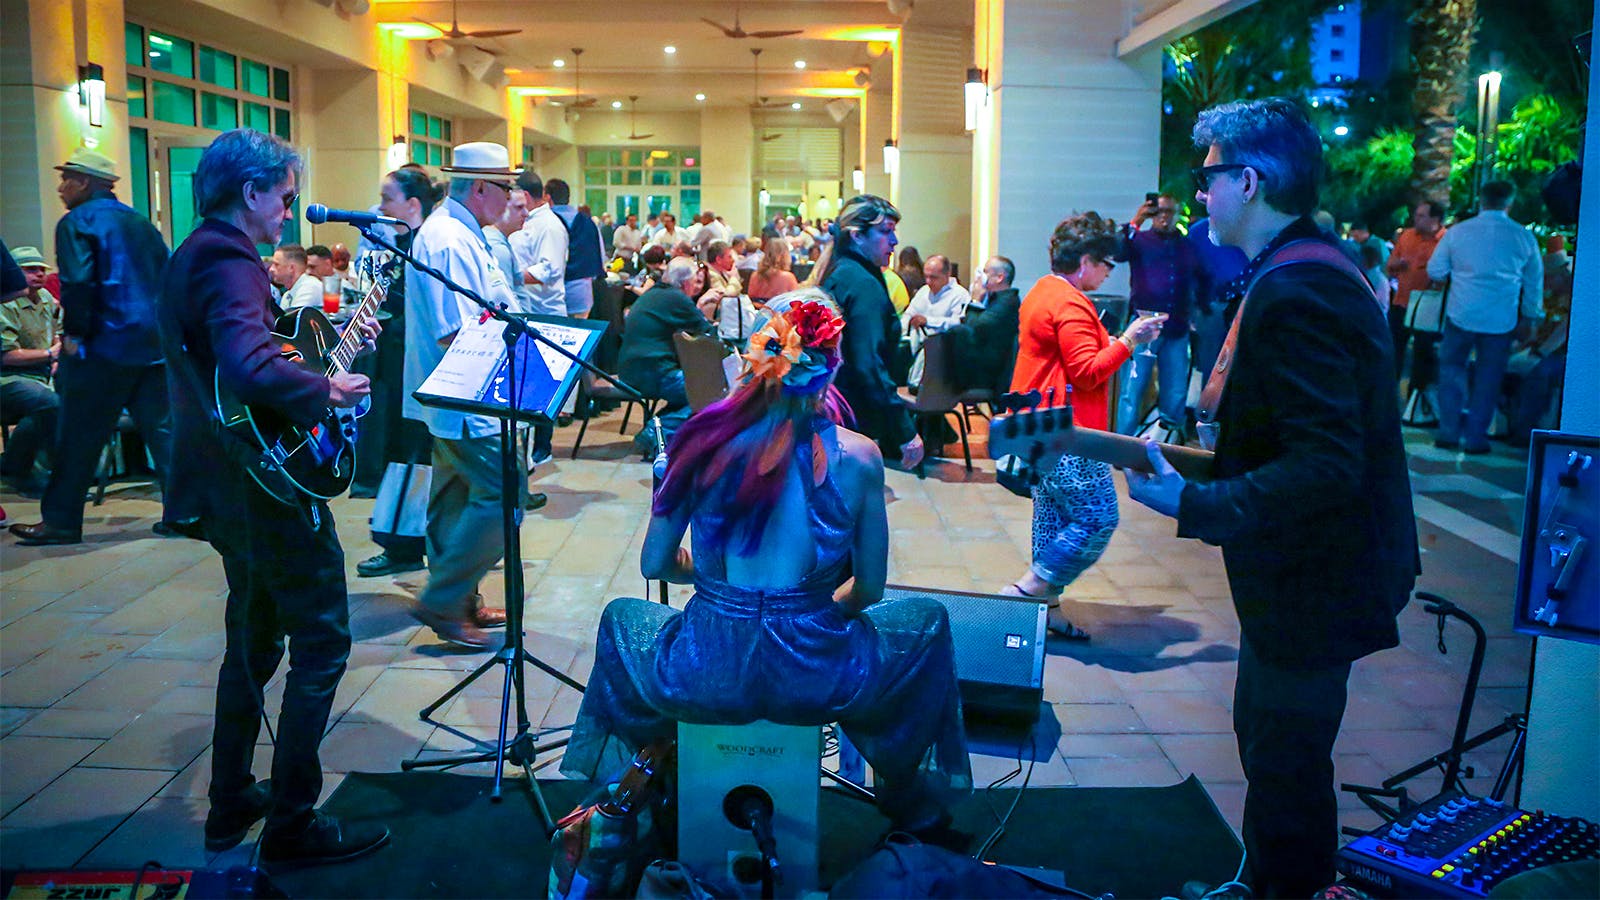 A live band entertained the crowd and kept the vibe upbeat and jovial.